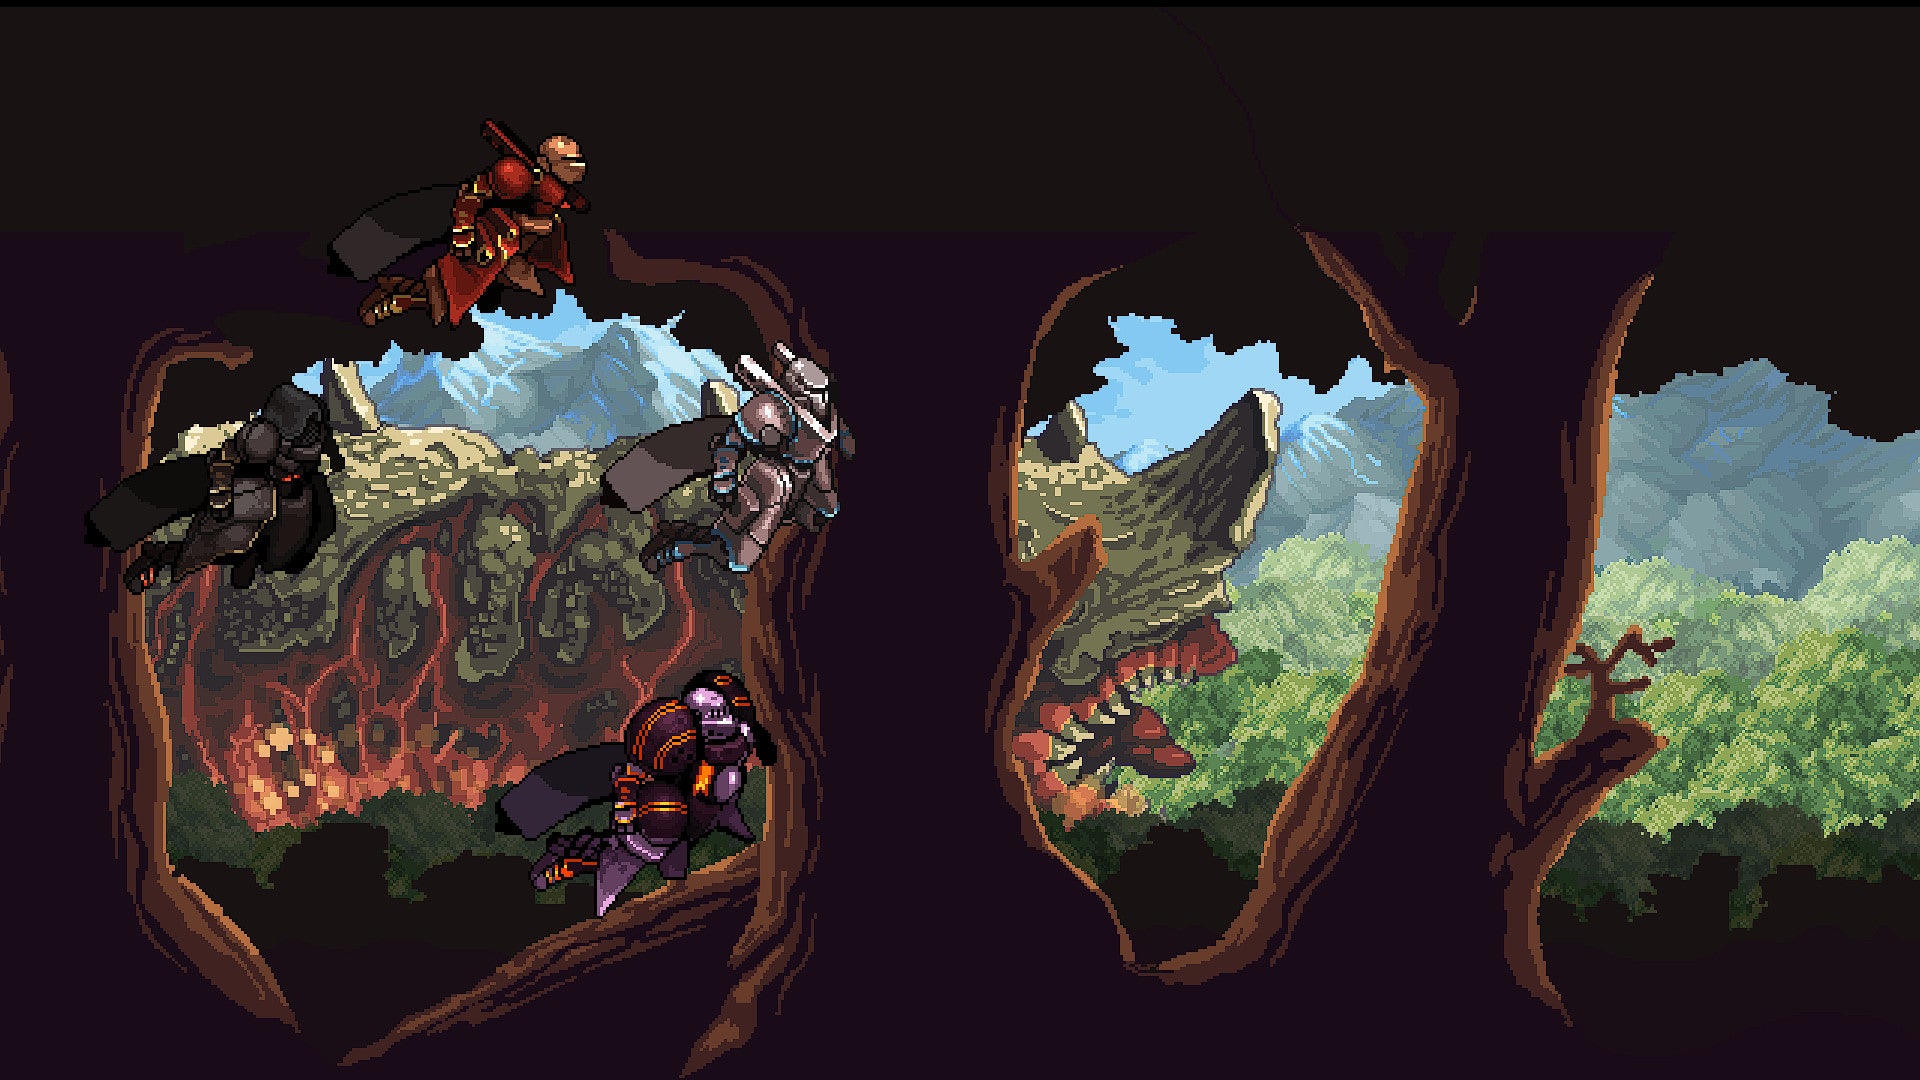 Several mechs fly through a forest while an enormous sandworm can be seen in the distance in Chained Echoes